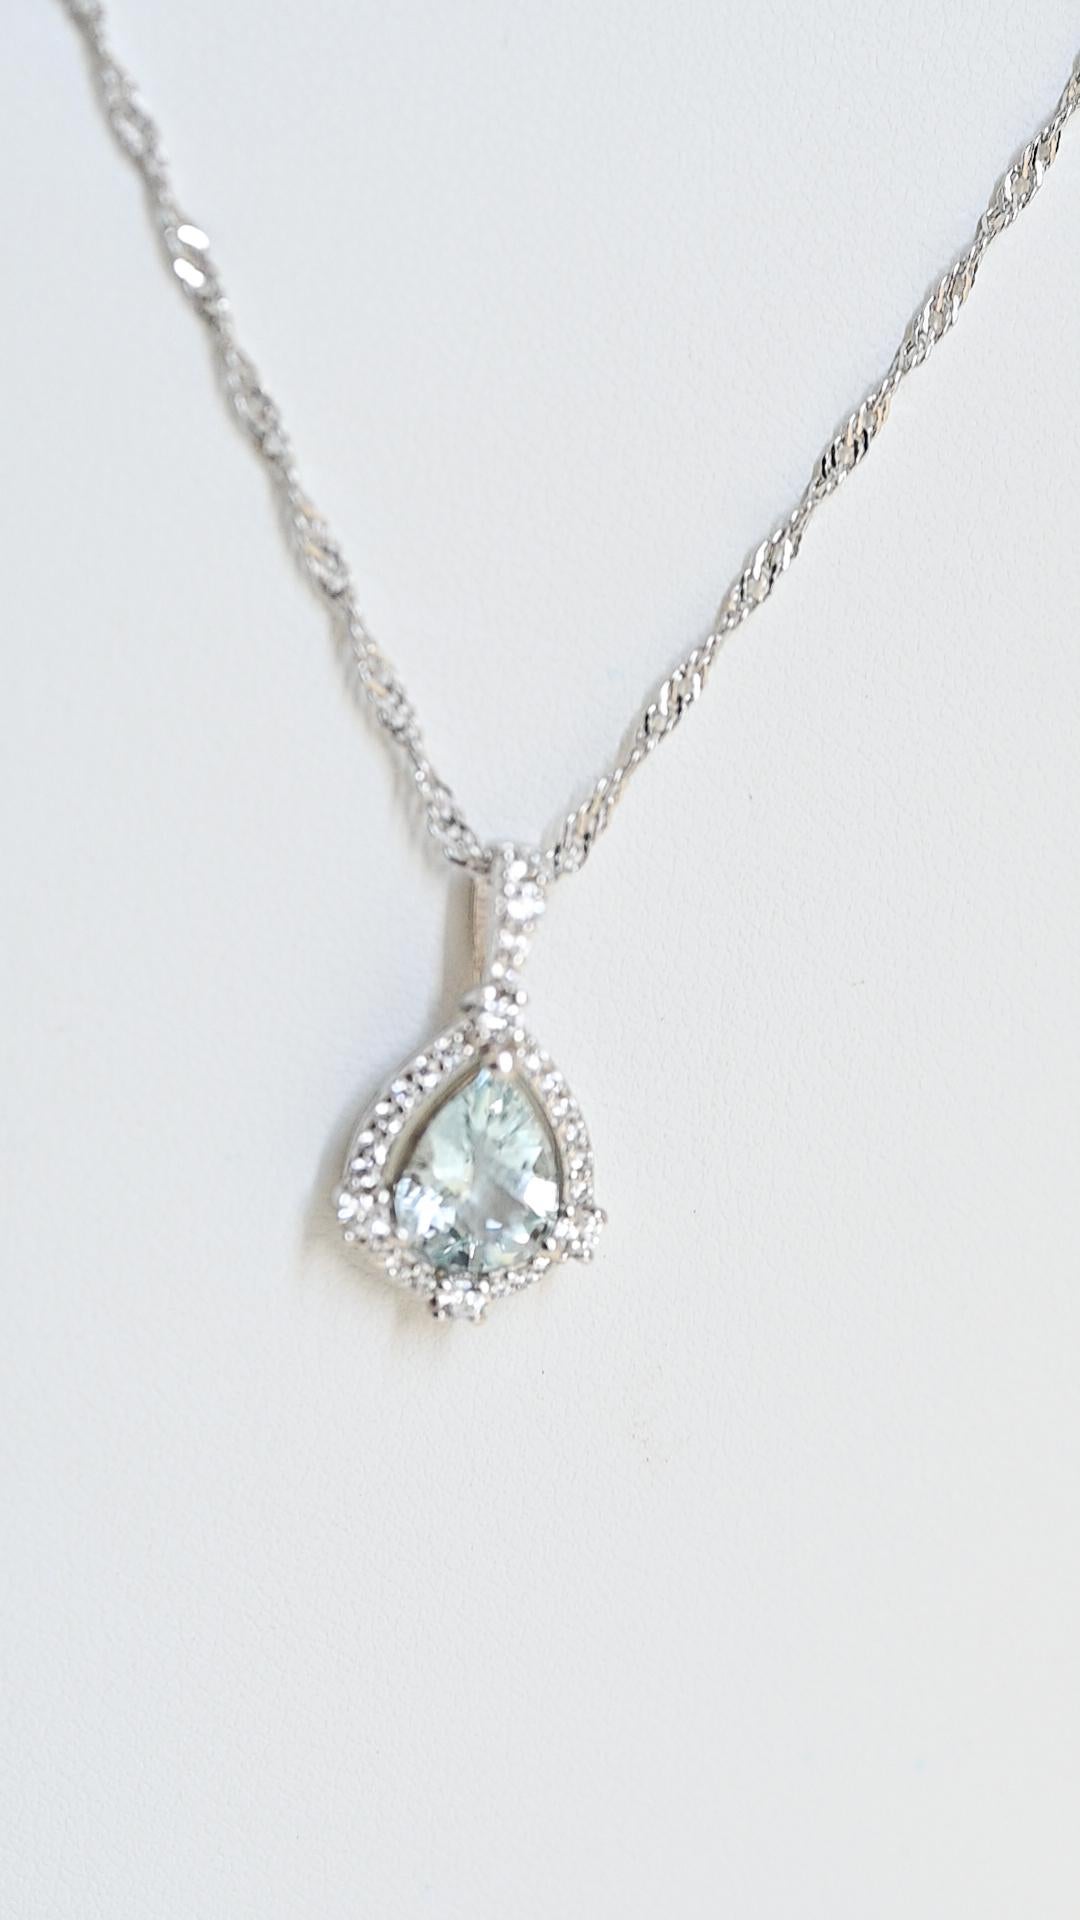 2.10 Cts Aquamarine Bridal Wedding Pendant Necklace Sterling Silver Jewelry  In New Condition For Sale In New York, NY